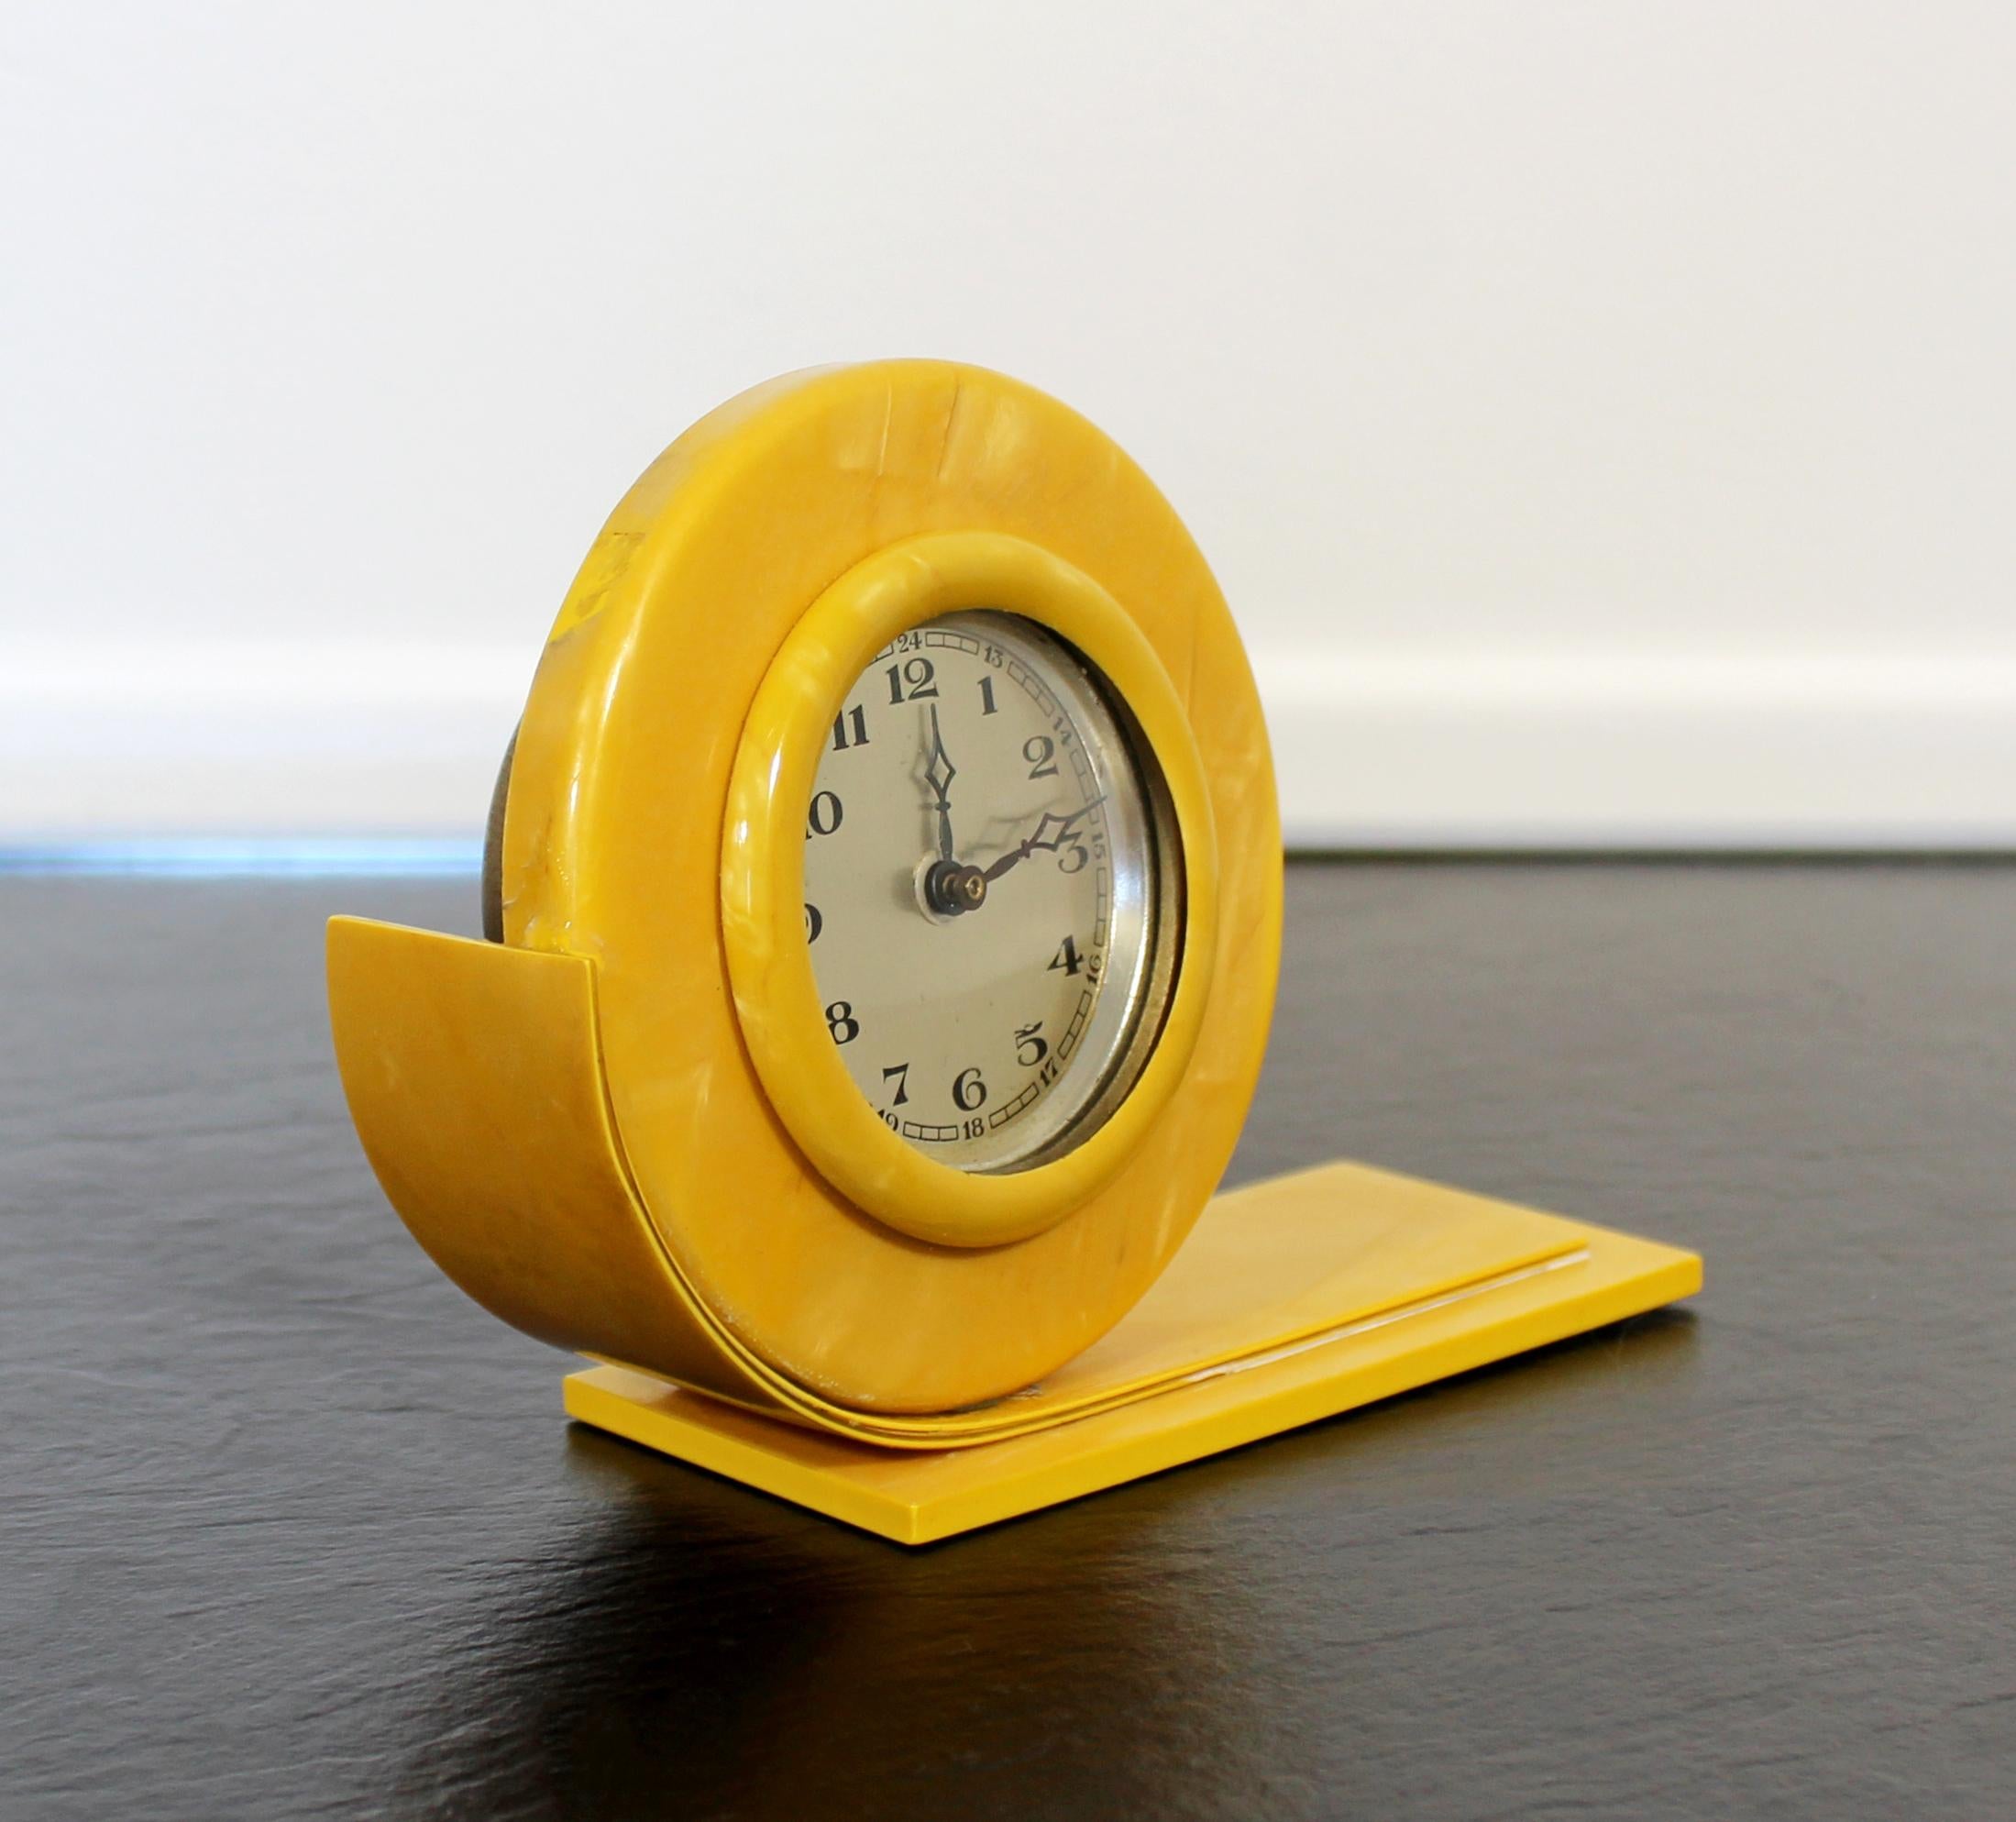 For your consideration is a small but vibrant, yellow celluloid mantle or shelf clock, made in England, circa the 1930s-1940s. In very good antique condition. The dimensions are 5.5